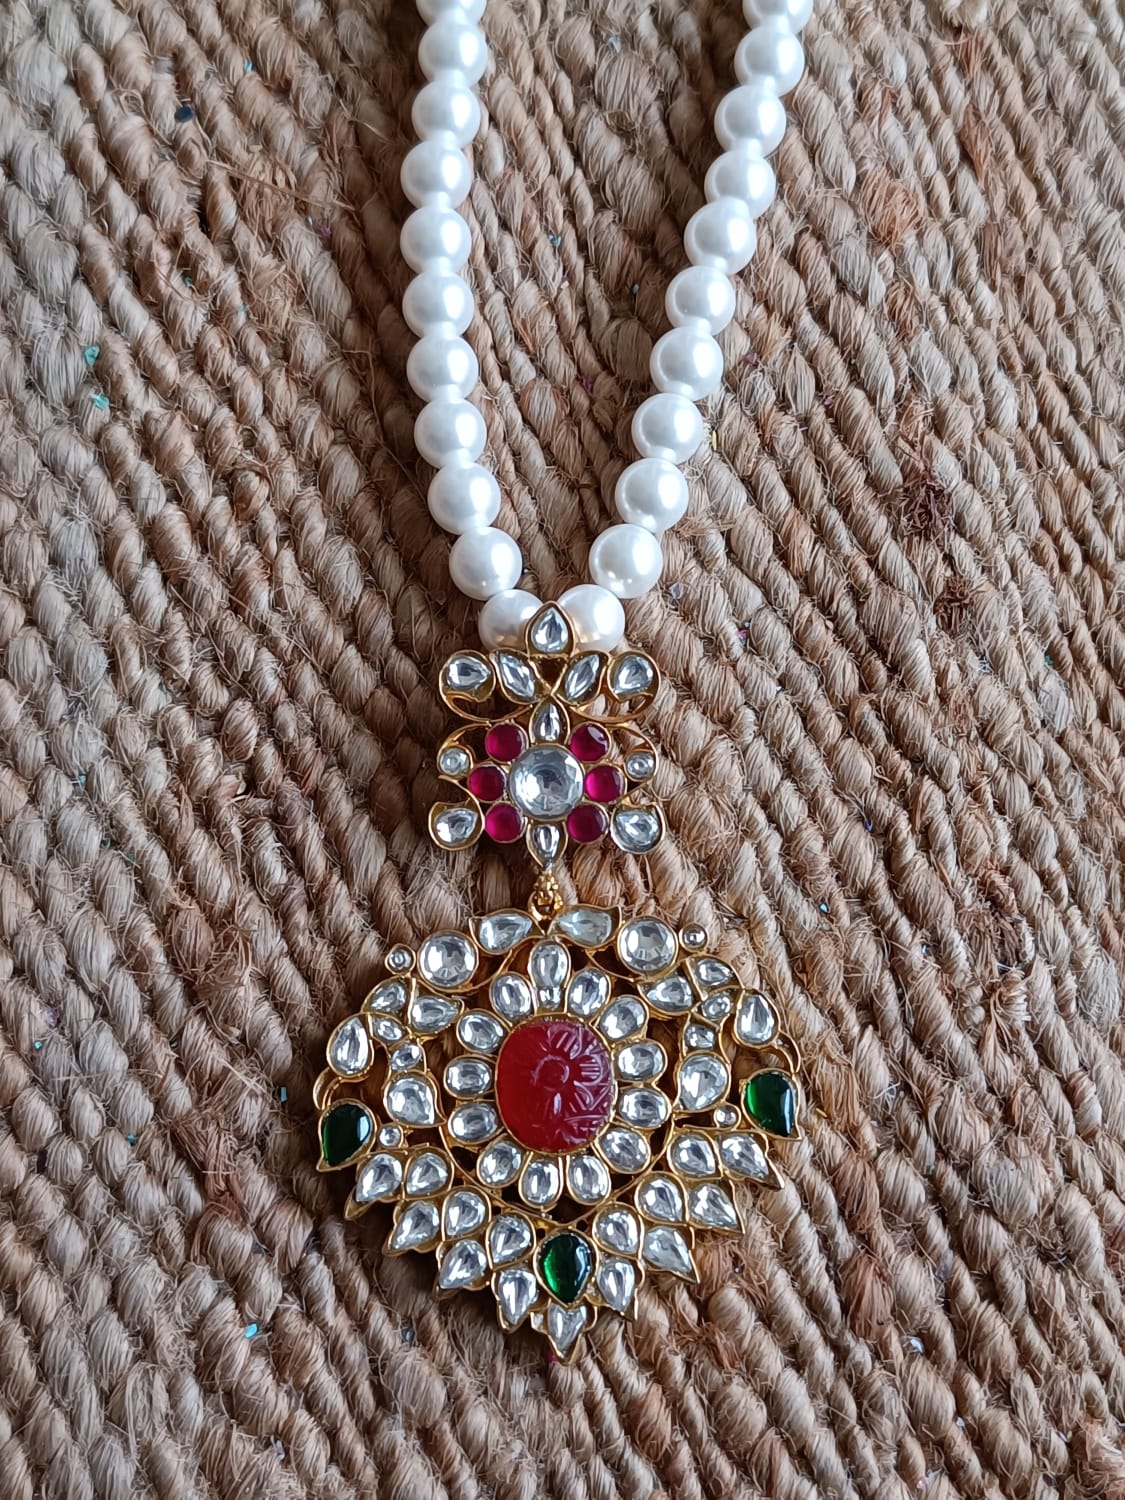 Jadau silver gold plated necklace, with swaroski pearls, and billor Polki.